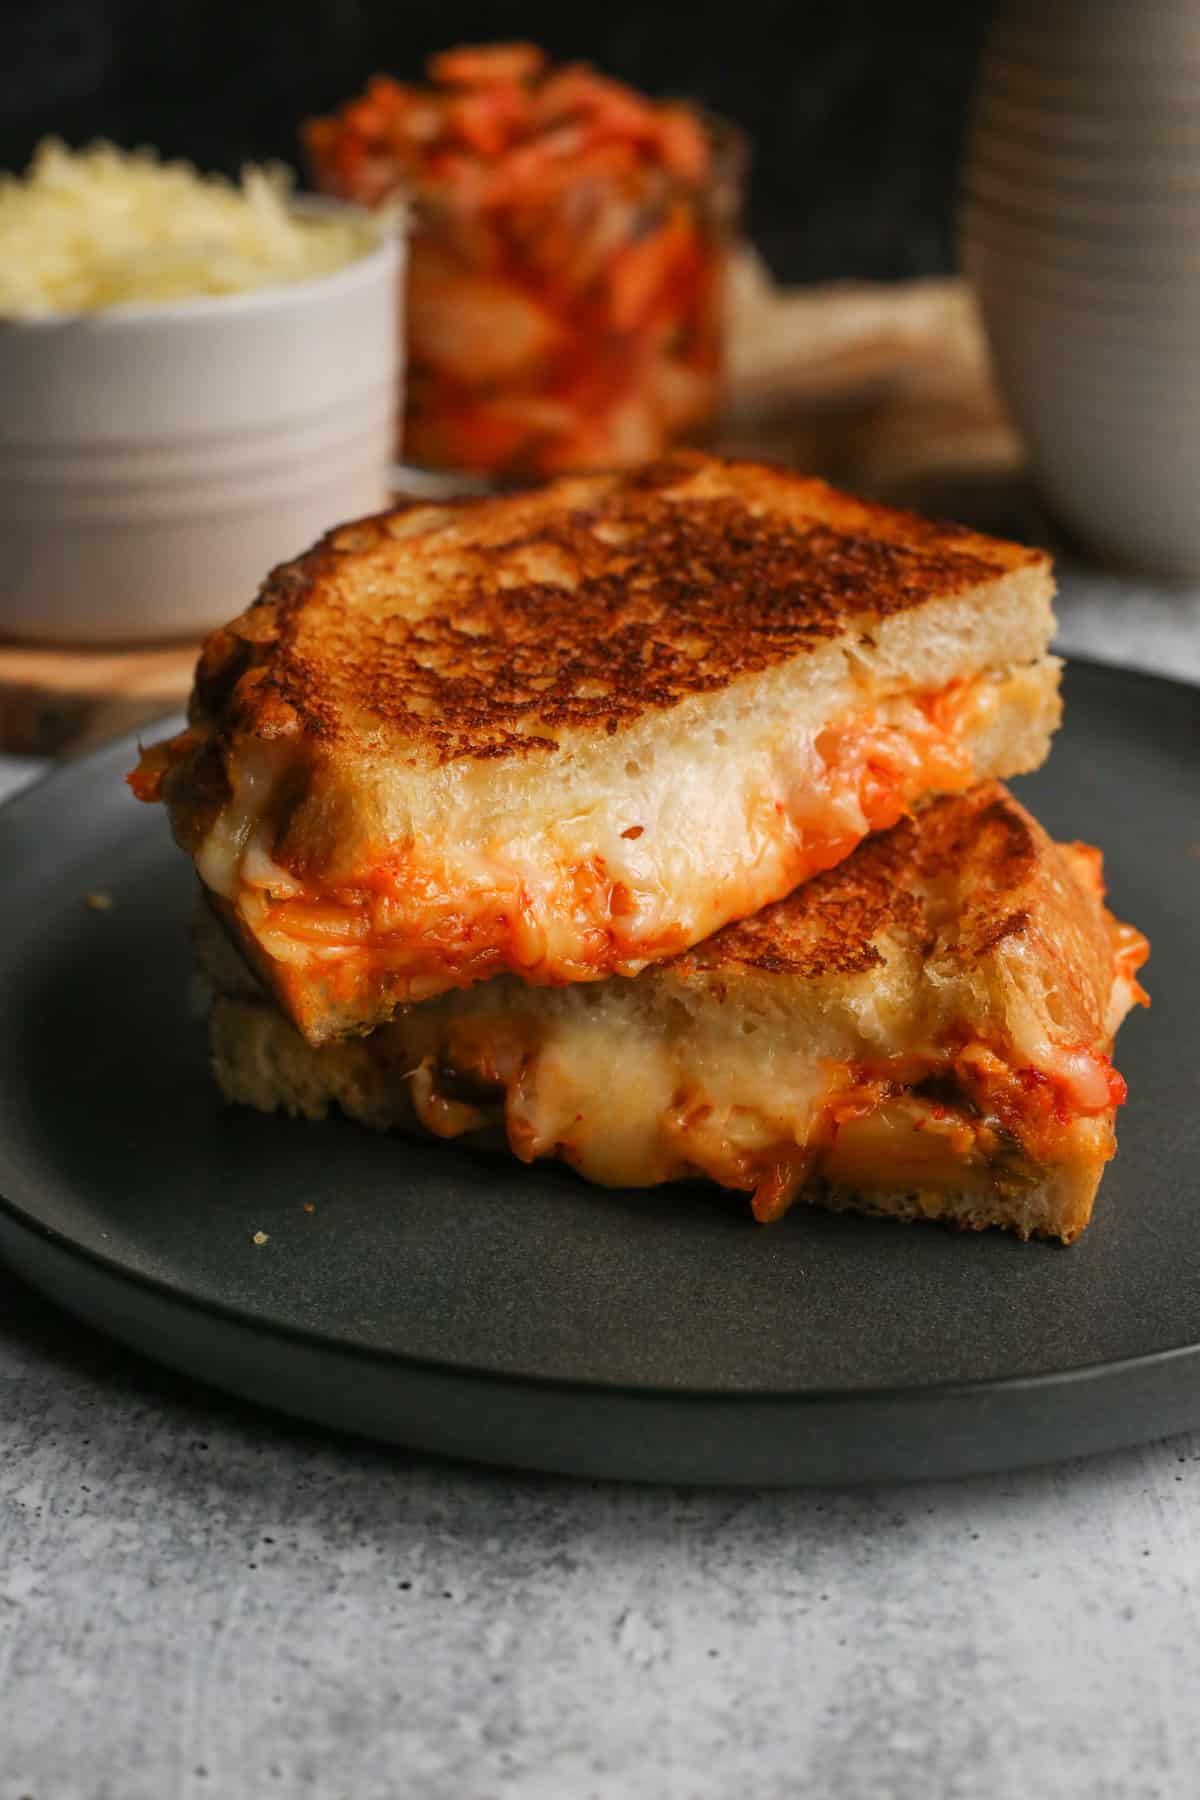 Close up view of a kimchi grilled cheese sandwich, sliced in half and stacked to reveal the melted cheese and kimchi inside the toasted sourdough bread